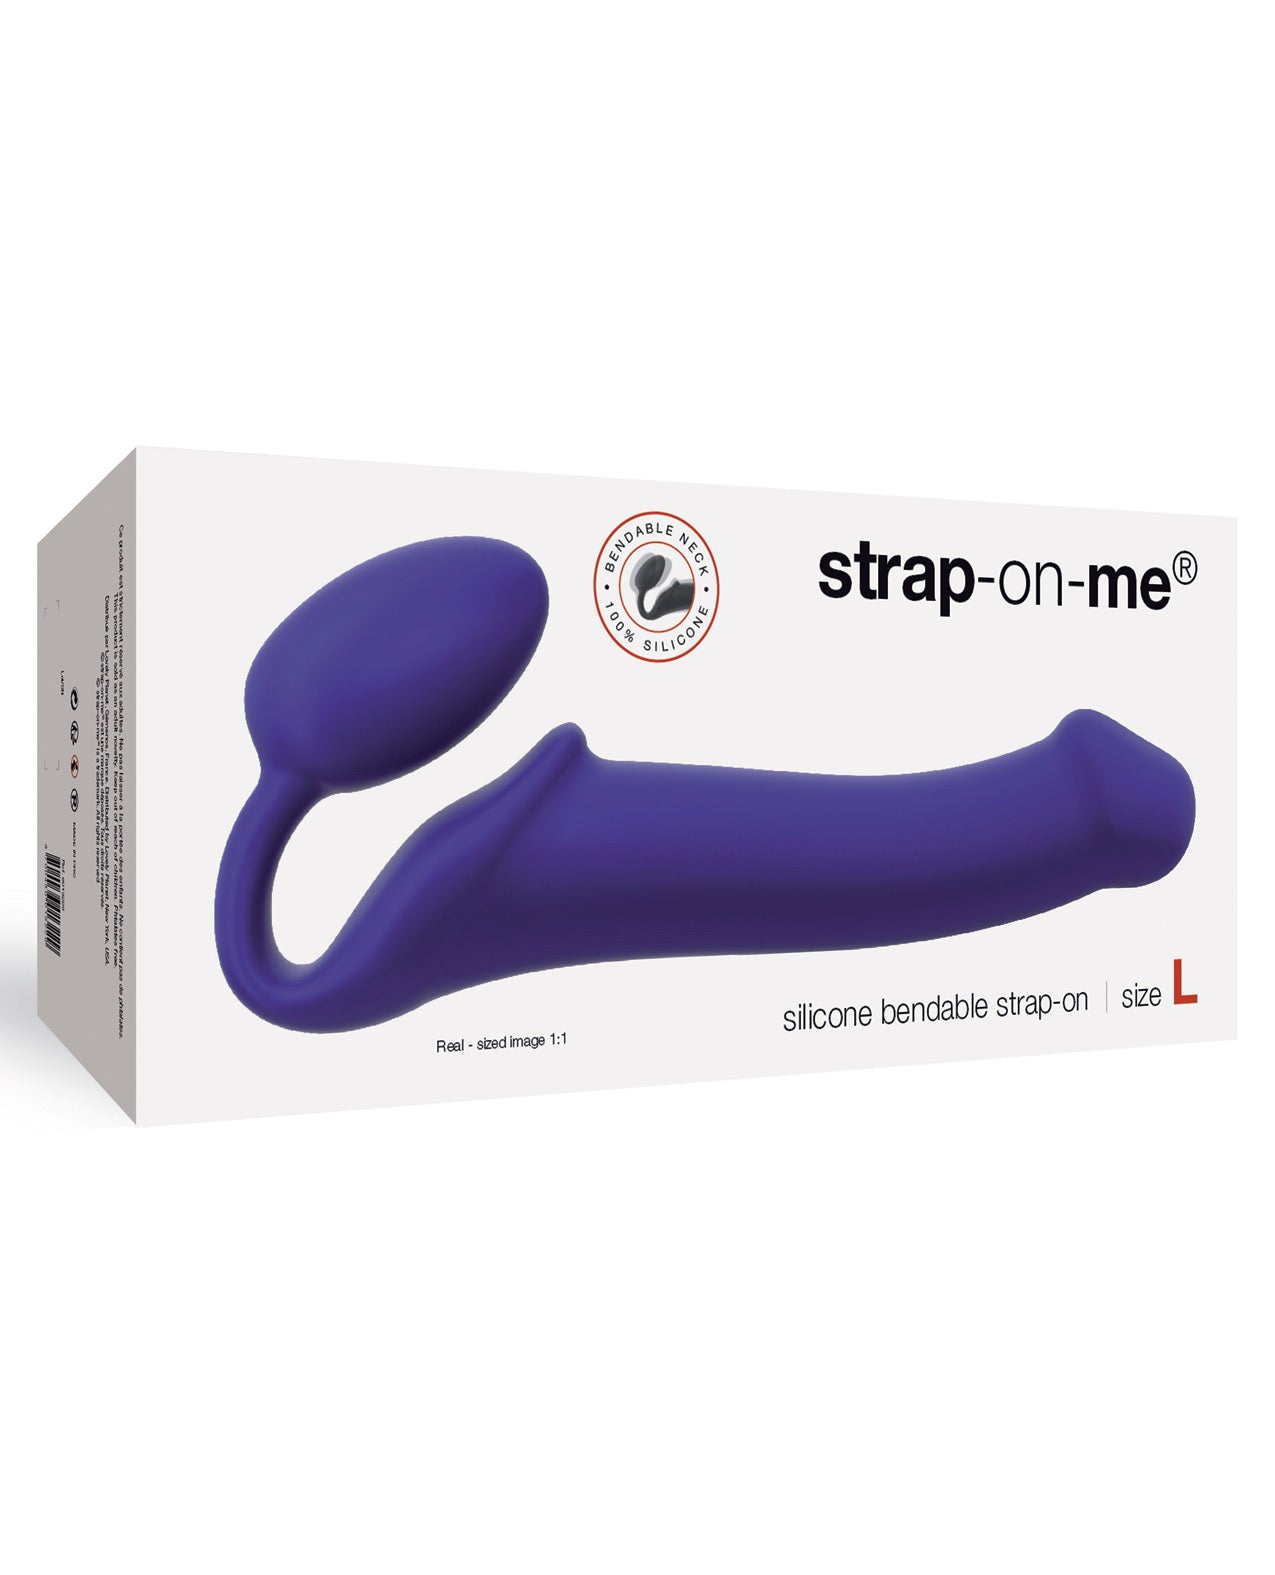 Strap On Me Silicone Bendable Strapless Strap On Large - Purple - LUST Depot